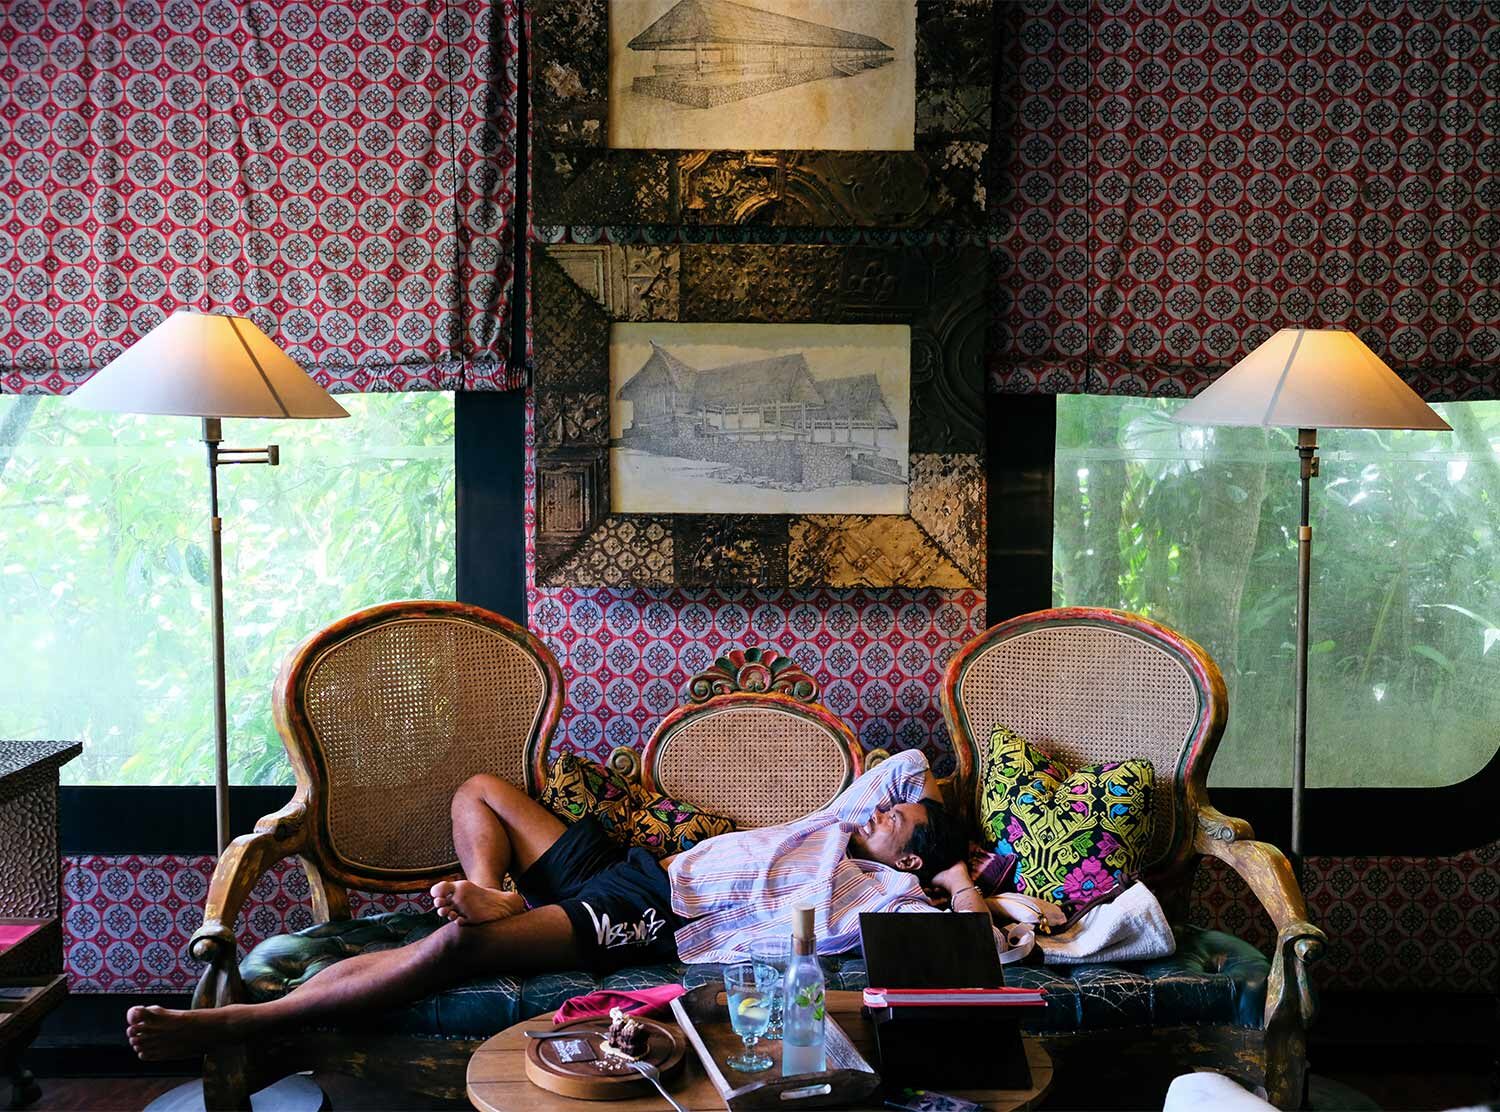 Capella Ubud Each tent goes by the name of a profession found during the 1900s. Our tent's name was Architect, and it featured old blueprint drawings and carved doors and windows as decoration. The colorful fabric hugging the space is a feast for the eye, especially during morning hours, with soft light illuminating the red, making you wake up in a glow